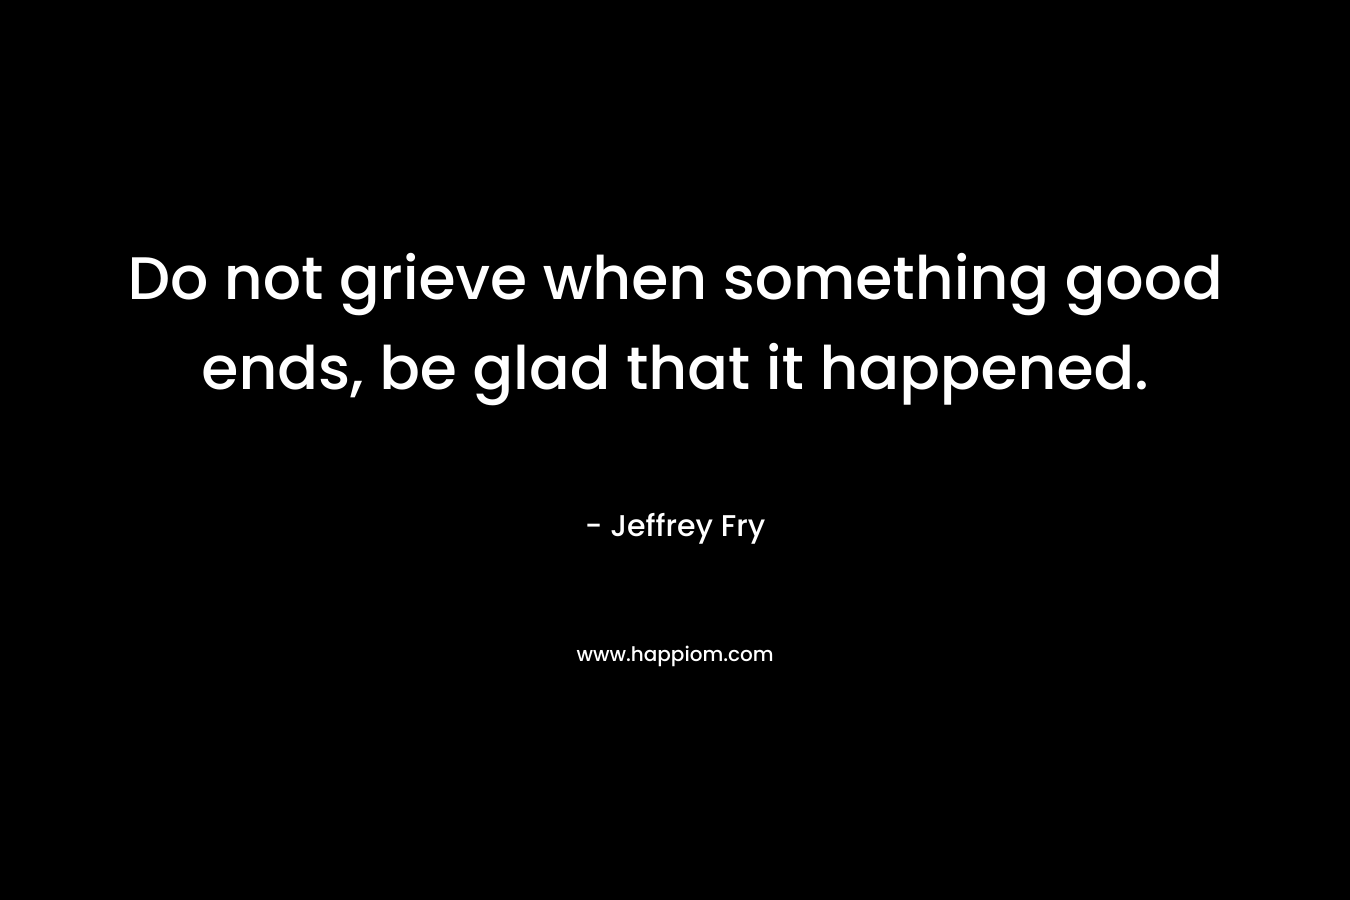 Do not grieve when something good ends, be glad that it happened.